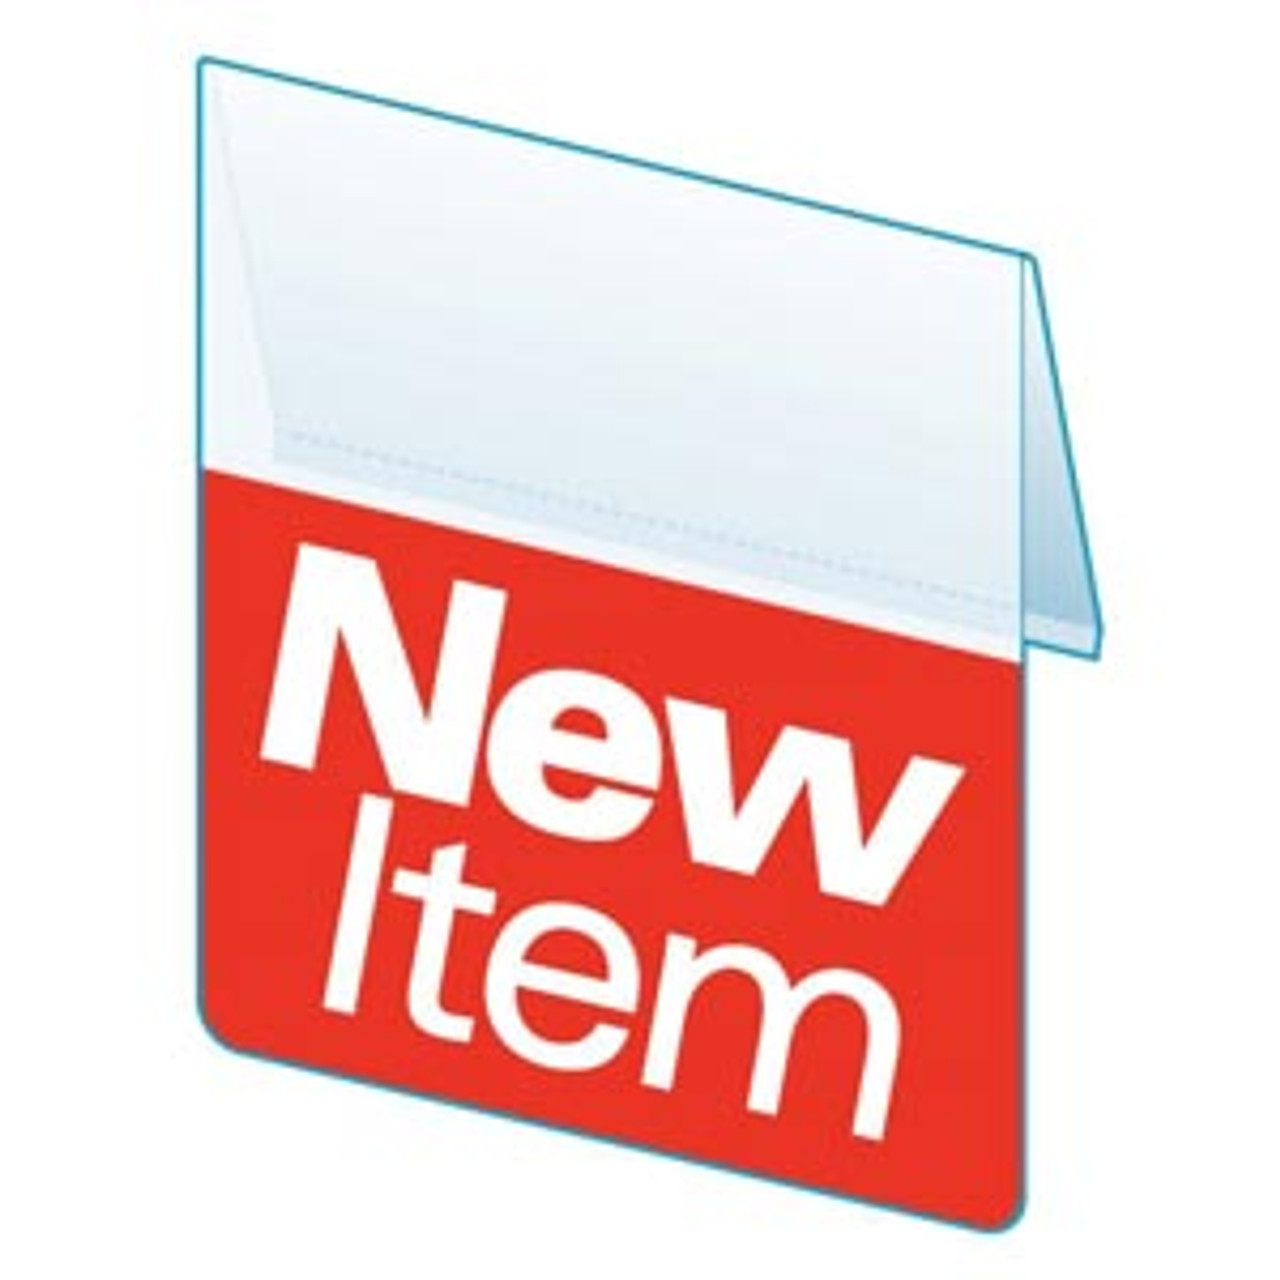 New Items Promo Tag Clearvision Ticket Molding ea.